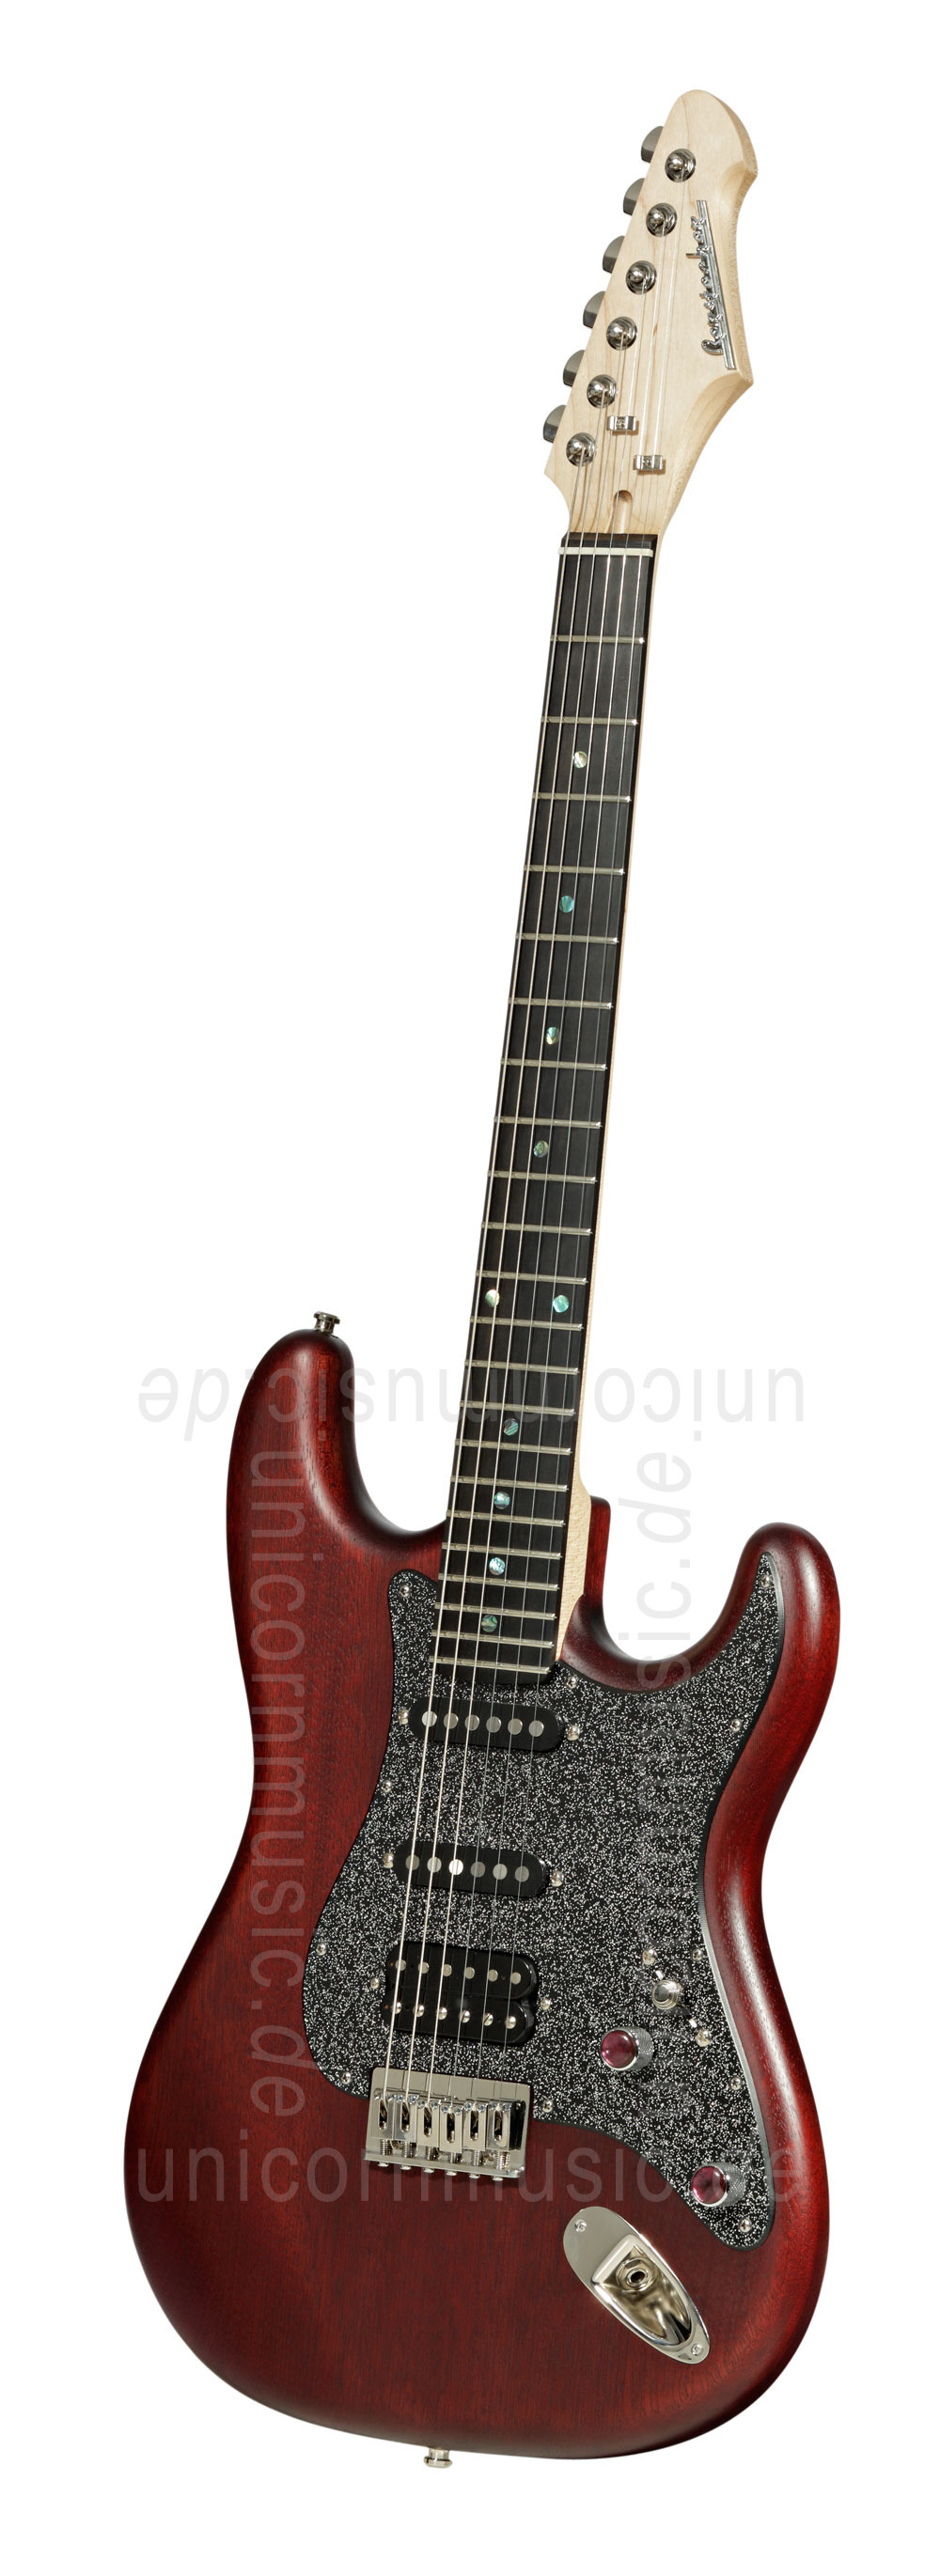 to article description / price Electric Guitar BERSTECHER Deluxe 2018 - Black Cherry / Black Sparkle + hard case - made in Germany